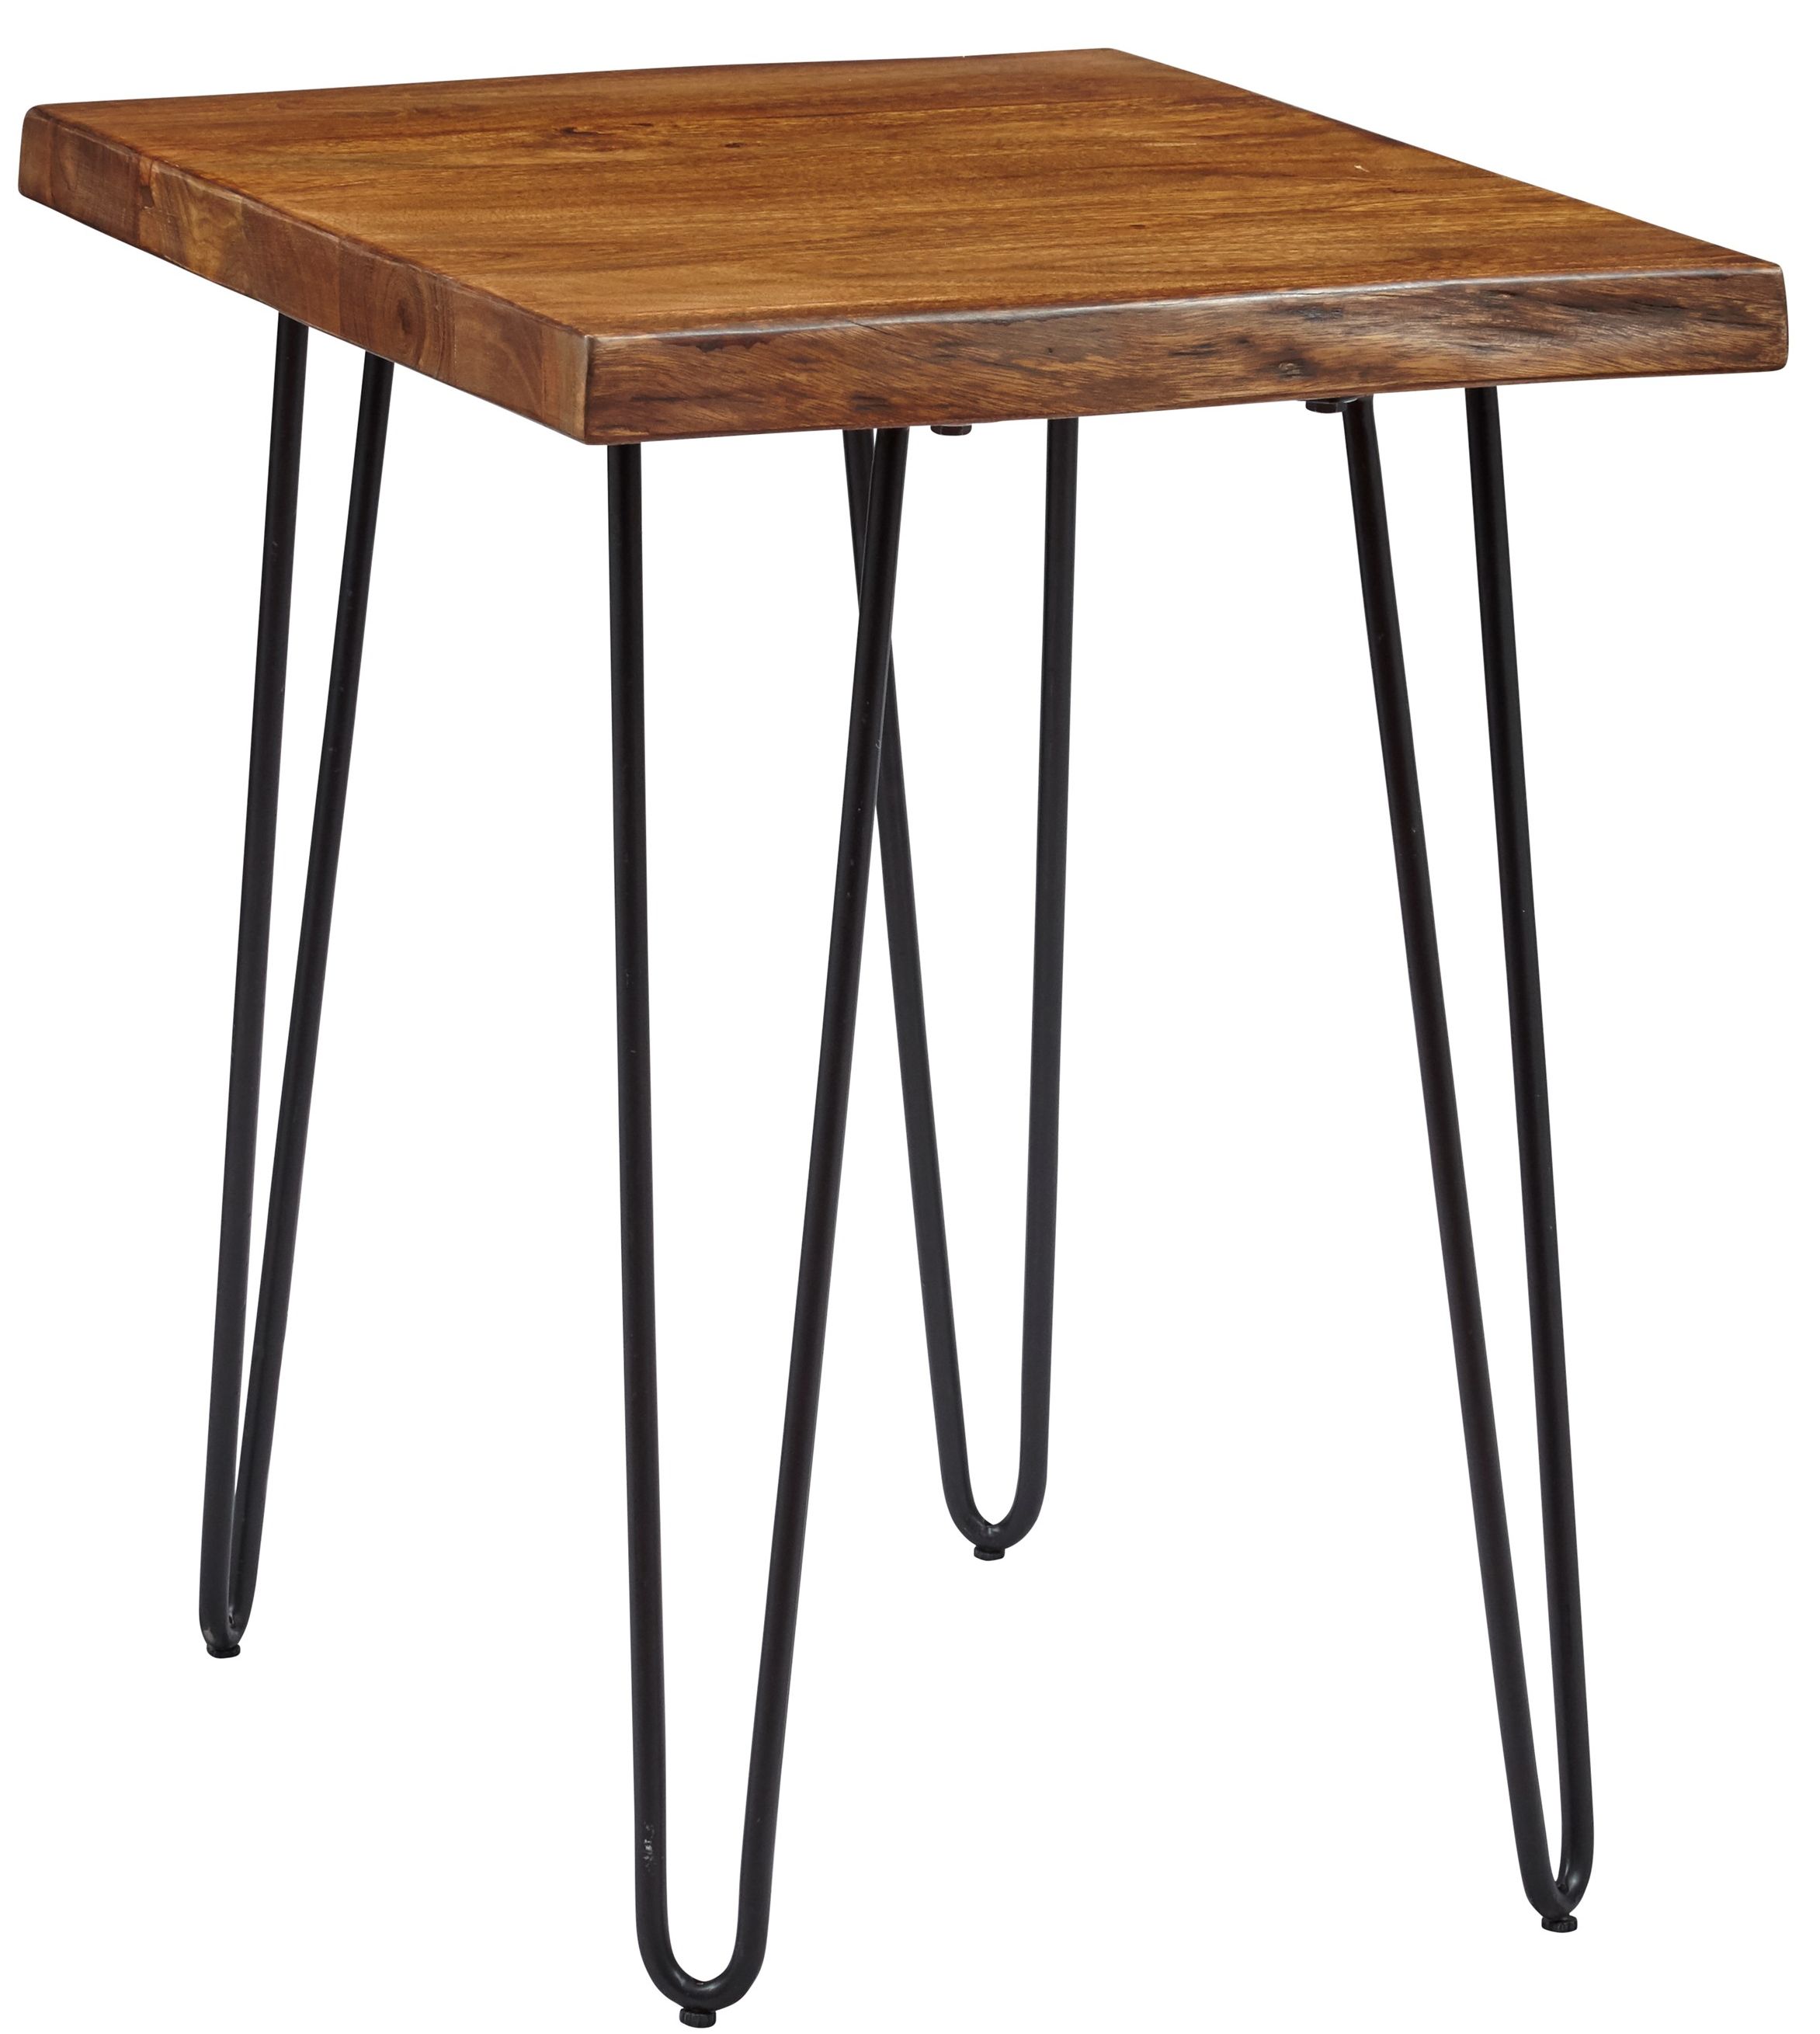 Jofran Inc. Nature's Edge Solid Acacia Chairside Table